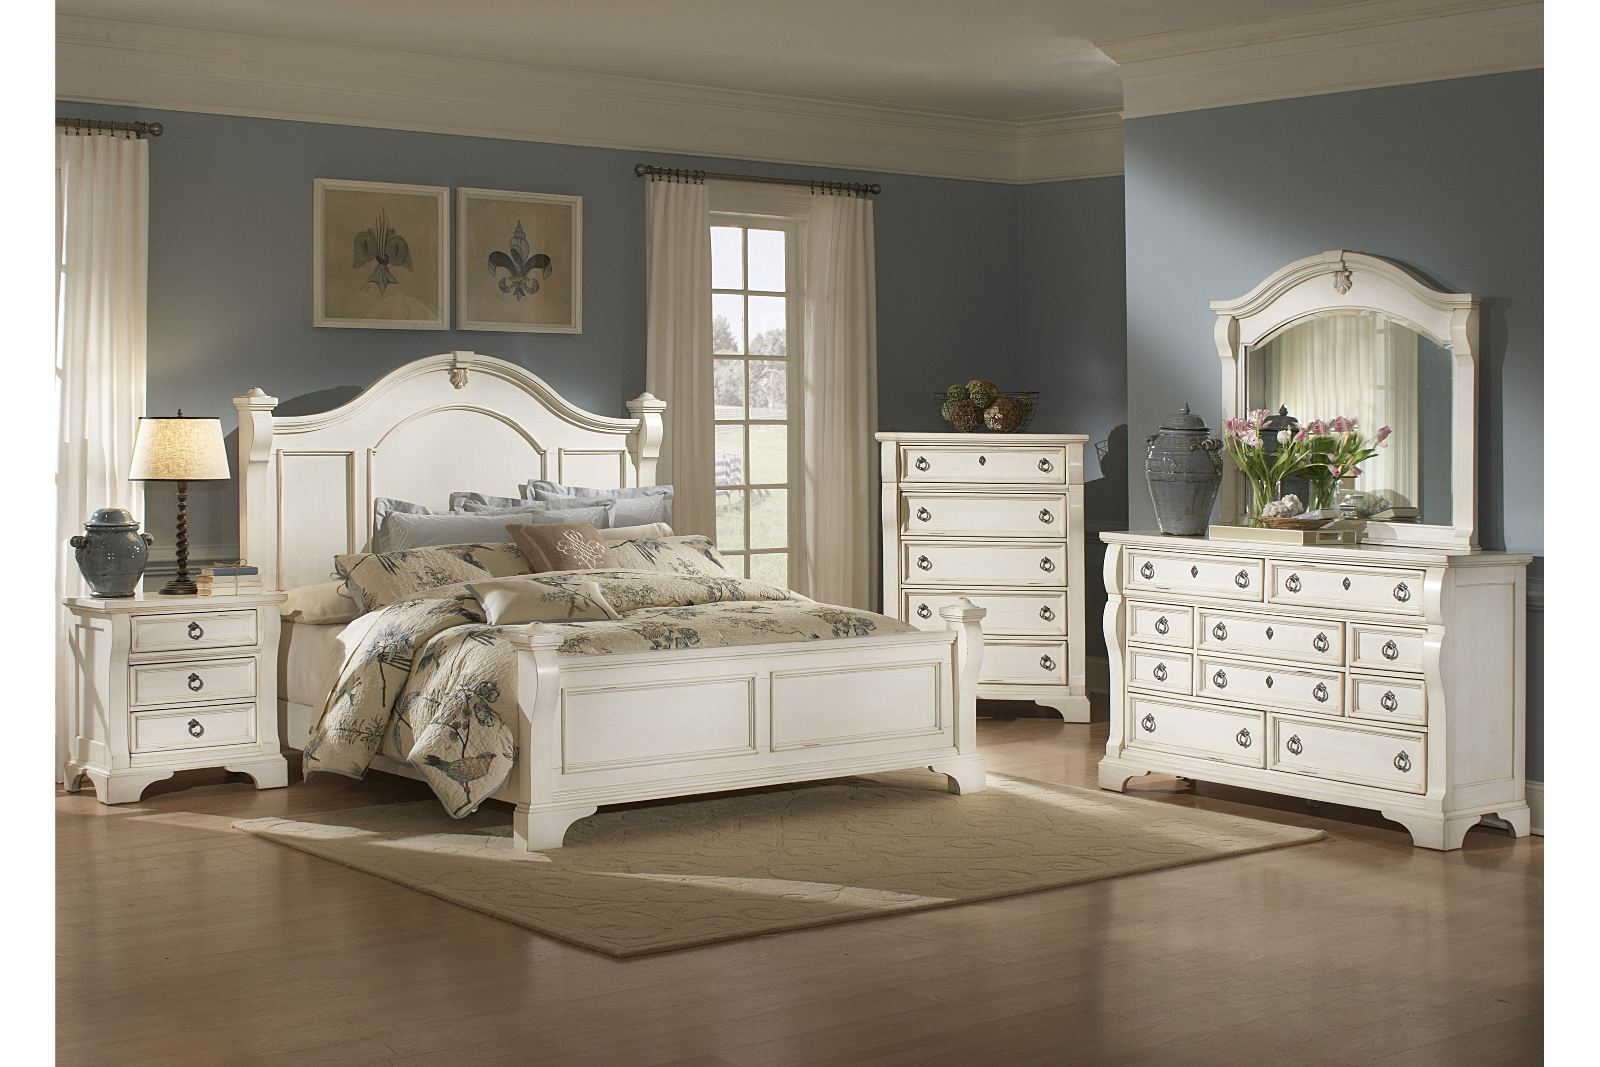 American Woodcrafters Heirloom Collection Poster Bedroom Set In Antique White 2910 with proportions 1600 X 1067